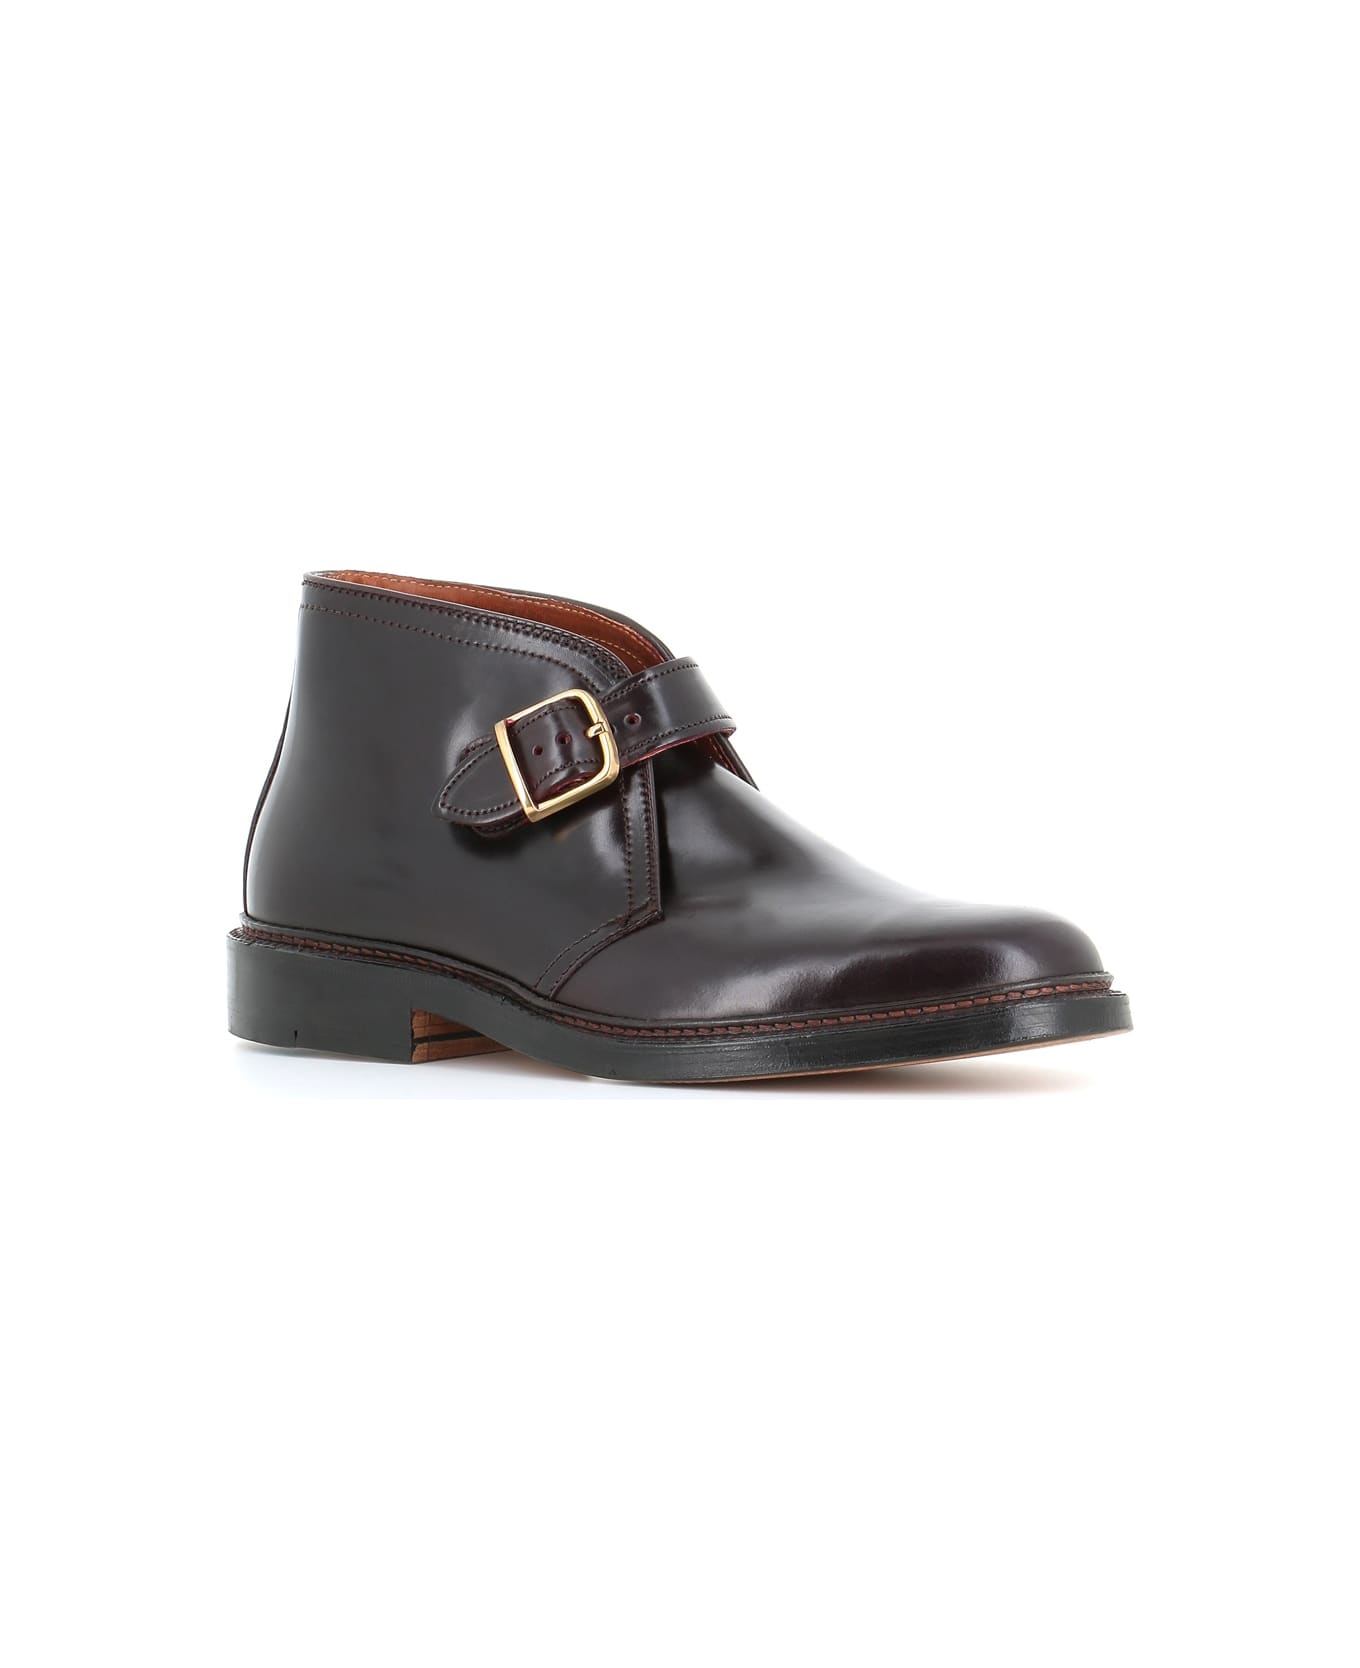 Alden Ankle Boot N6704 - Mahogany ブーツ